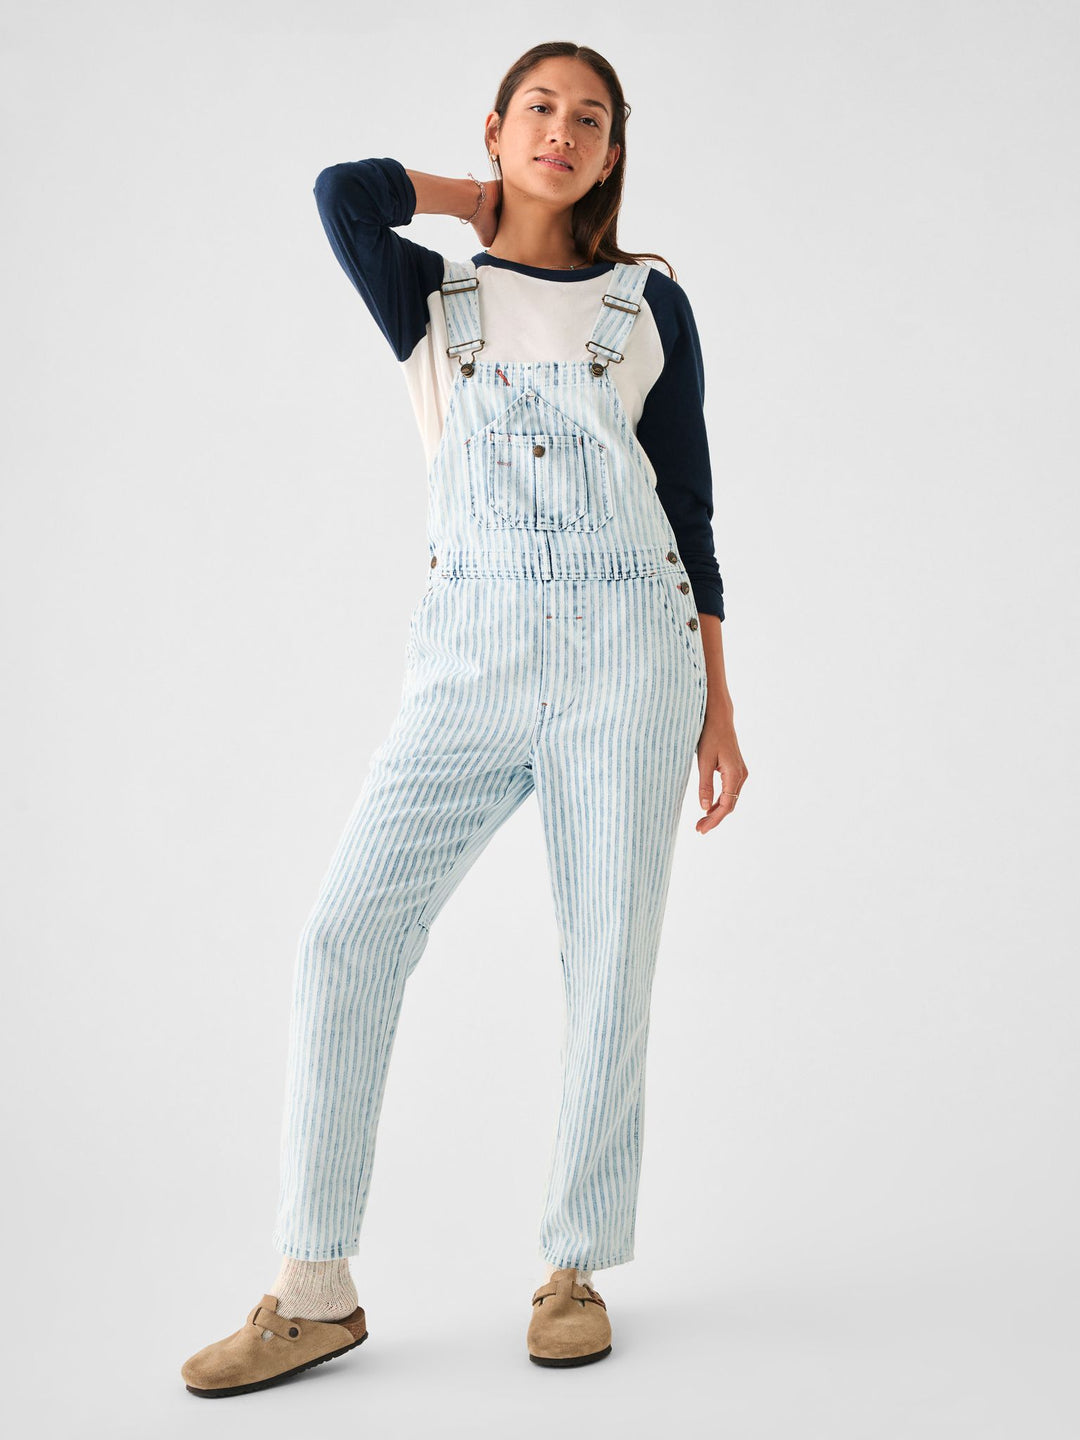 TOPSAIL OVERALL - RAILROAD STRIPE - Kingfisher Road - Online Boutique